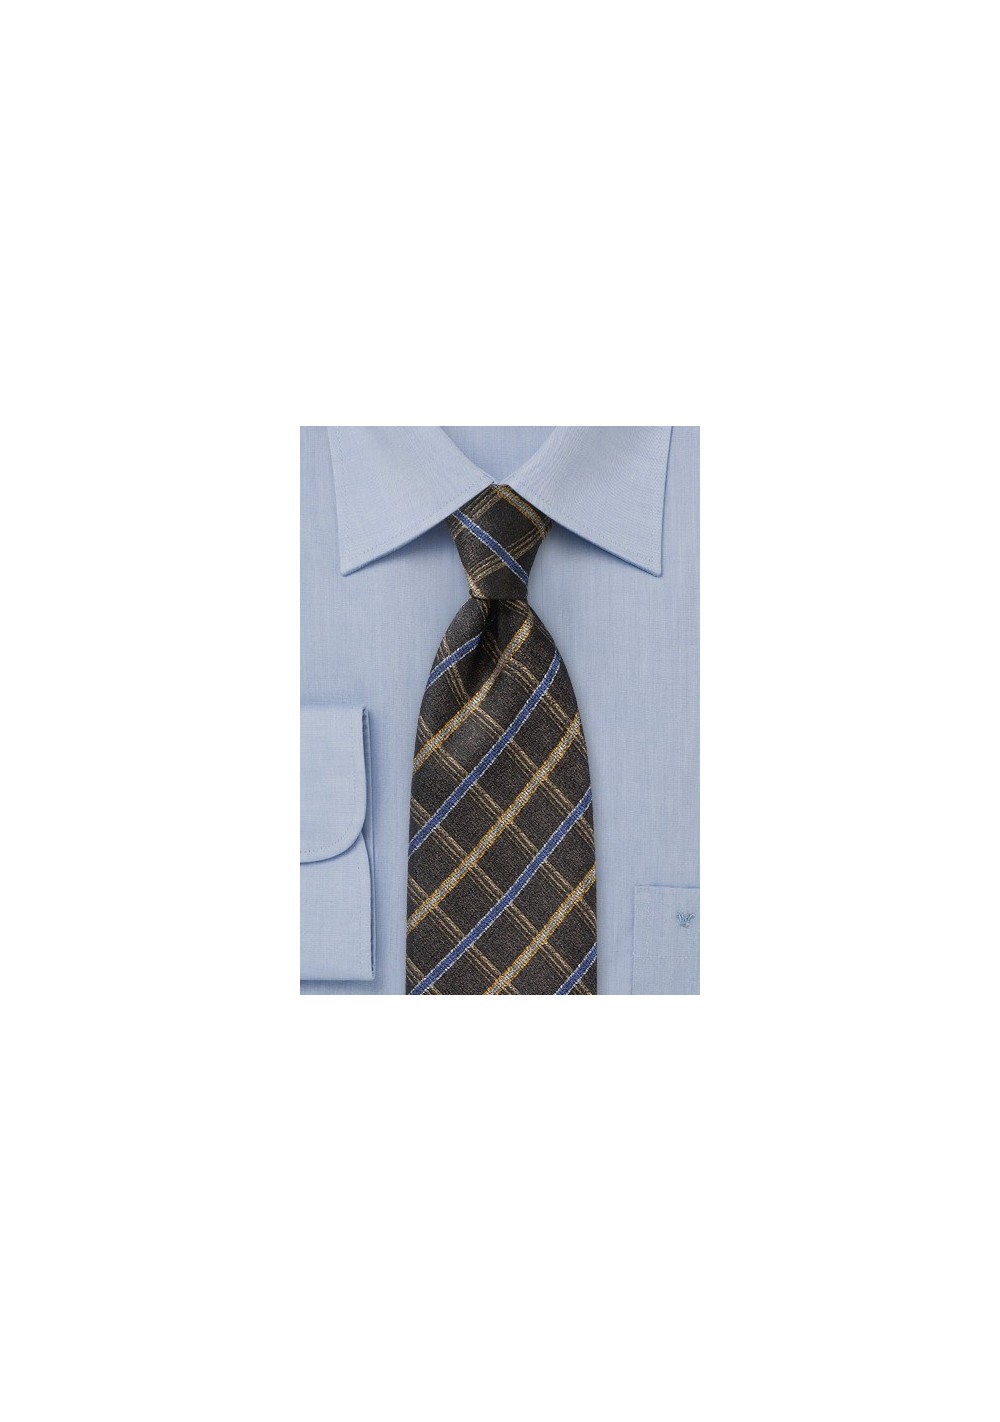 Choclate Brown Checked Necktie with Blue and Gold Accents